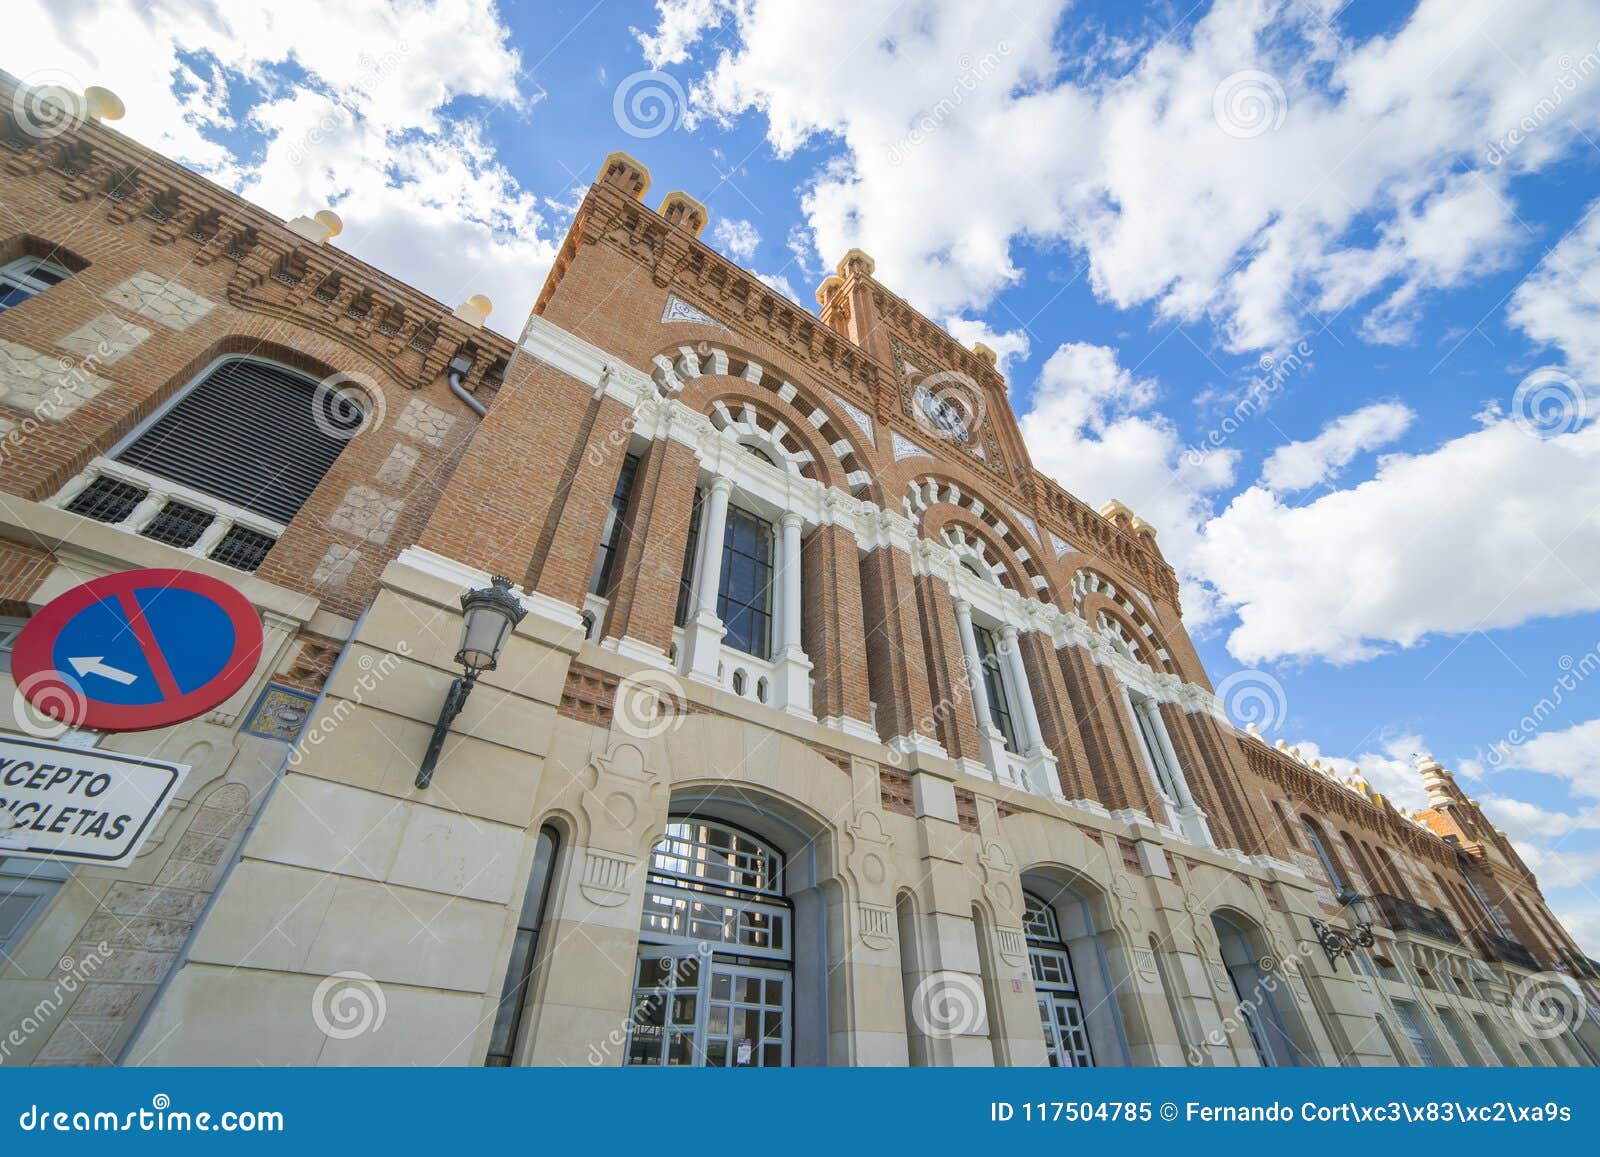 railway station of renfe in aranjuez, spain. renfe is the main r